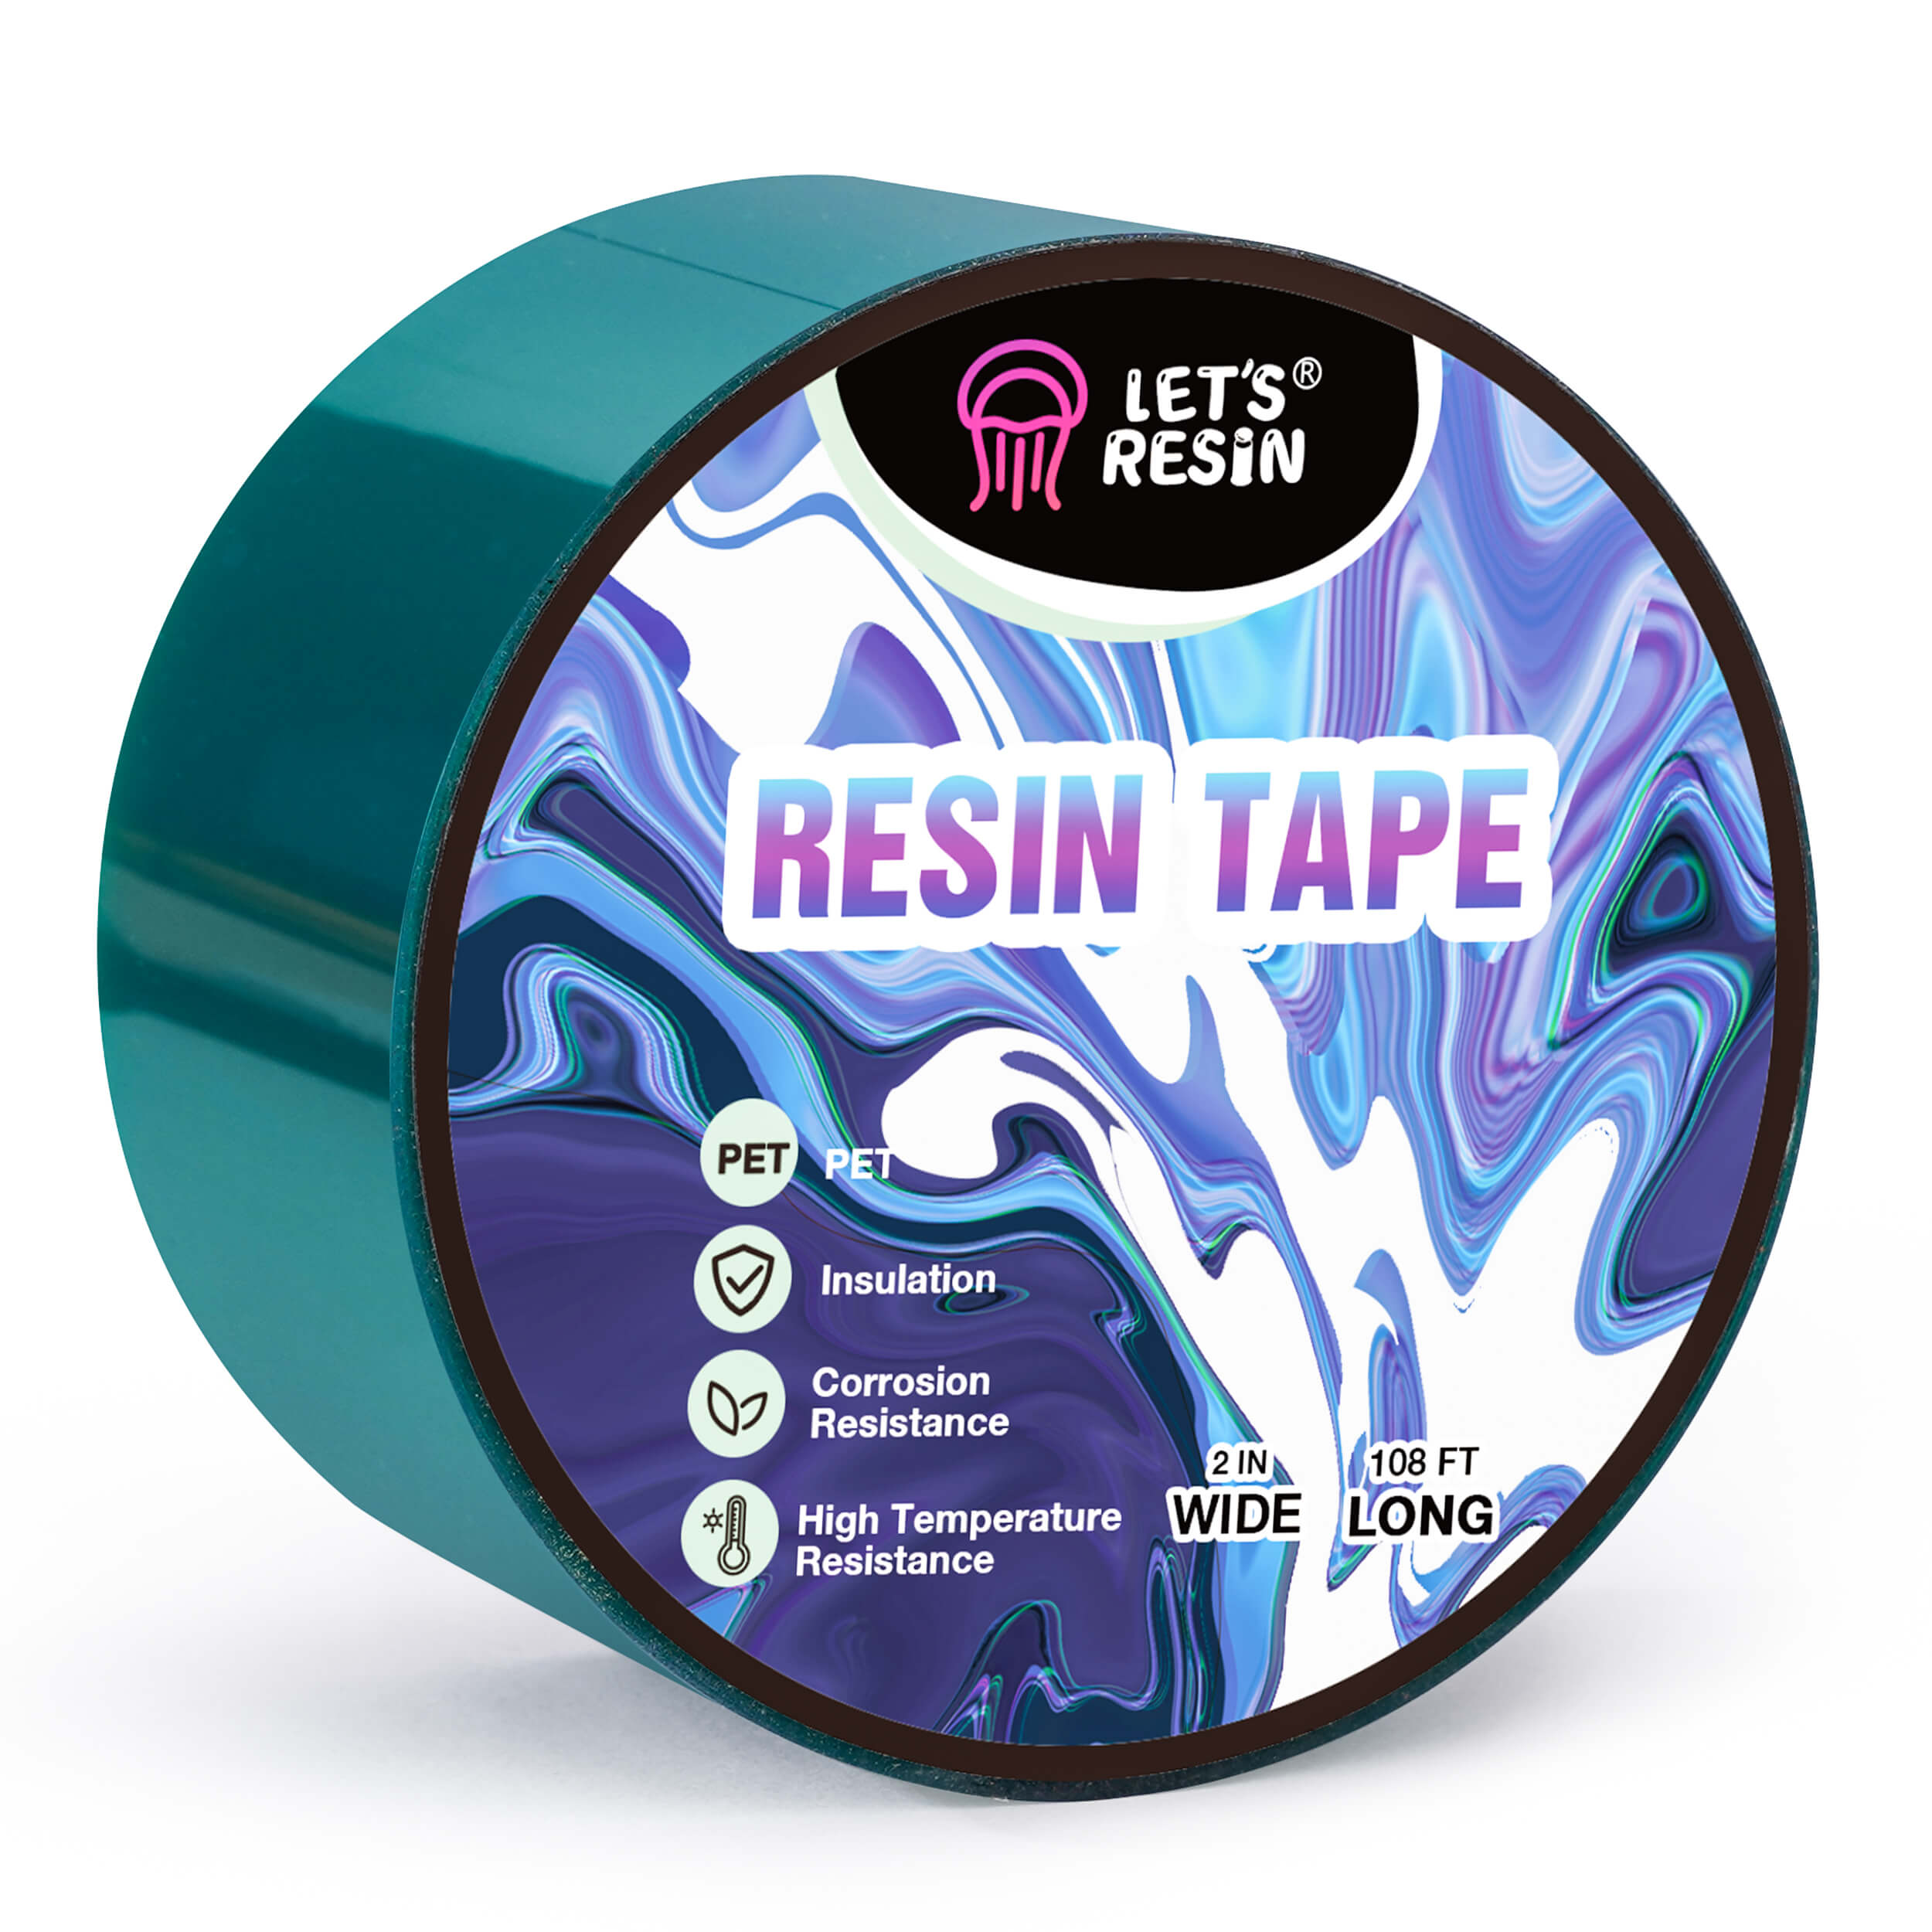 MISSYOUNG Resin Tape for Epoxy Resin Molding, Thermal Adhesive